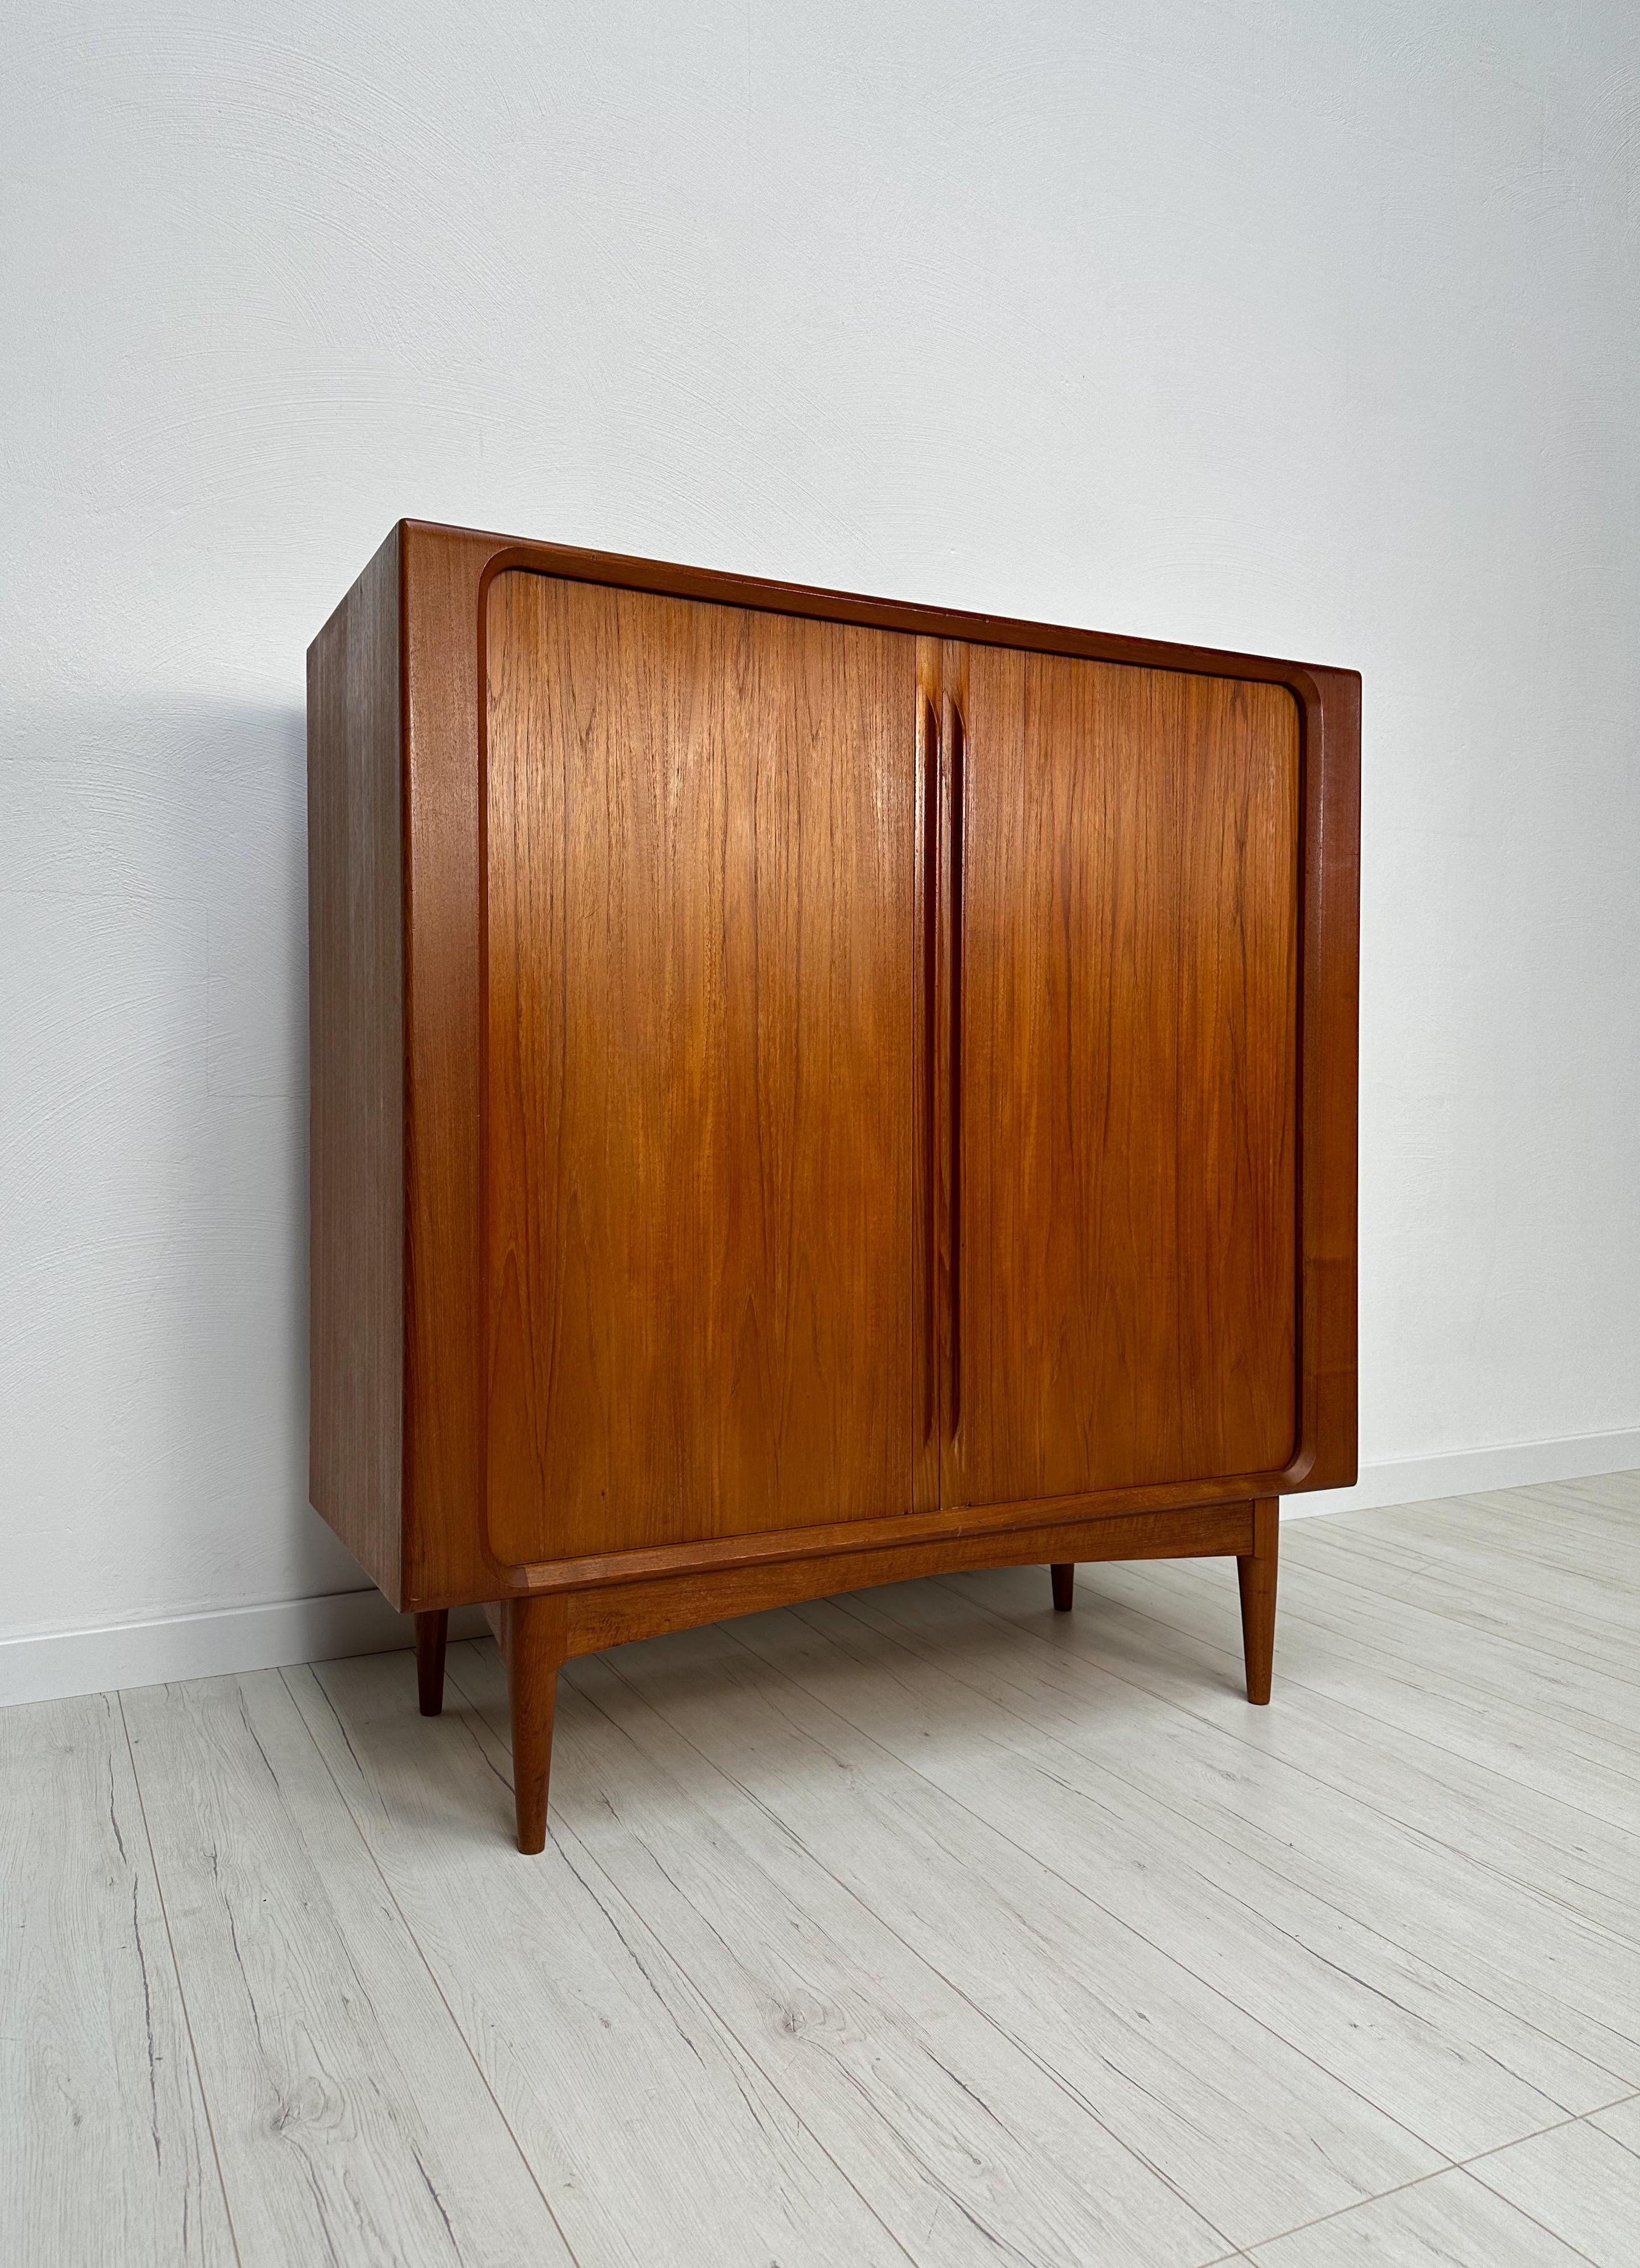 Vintage high quality teak highboard from Denmark by Bernhard Pedersen & Søn, 1960s. Elegant tambour doors with organically shaped door handles. Very neat original vintage condition with age-related signs of use. 

Dimensions: W 120 x H 128 x D 48cm